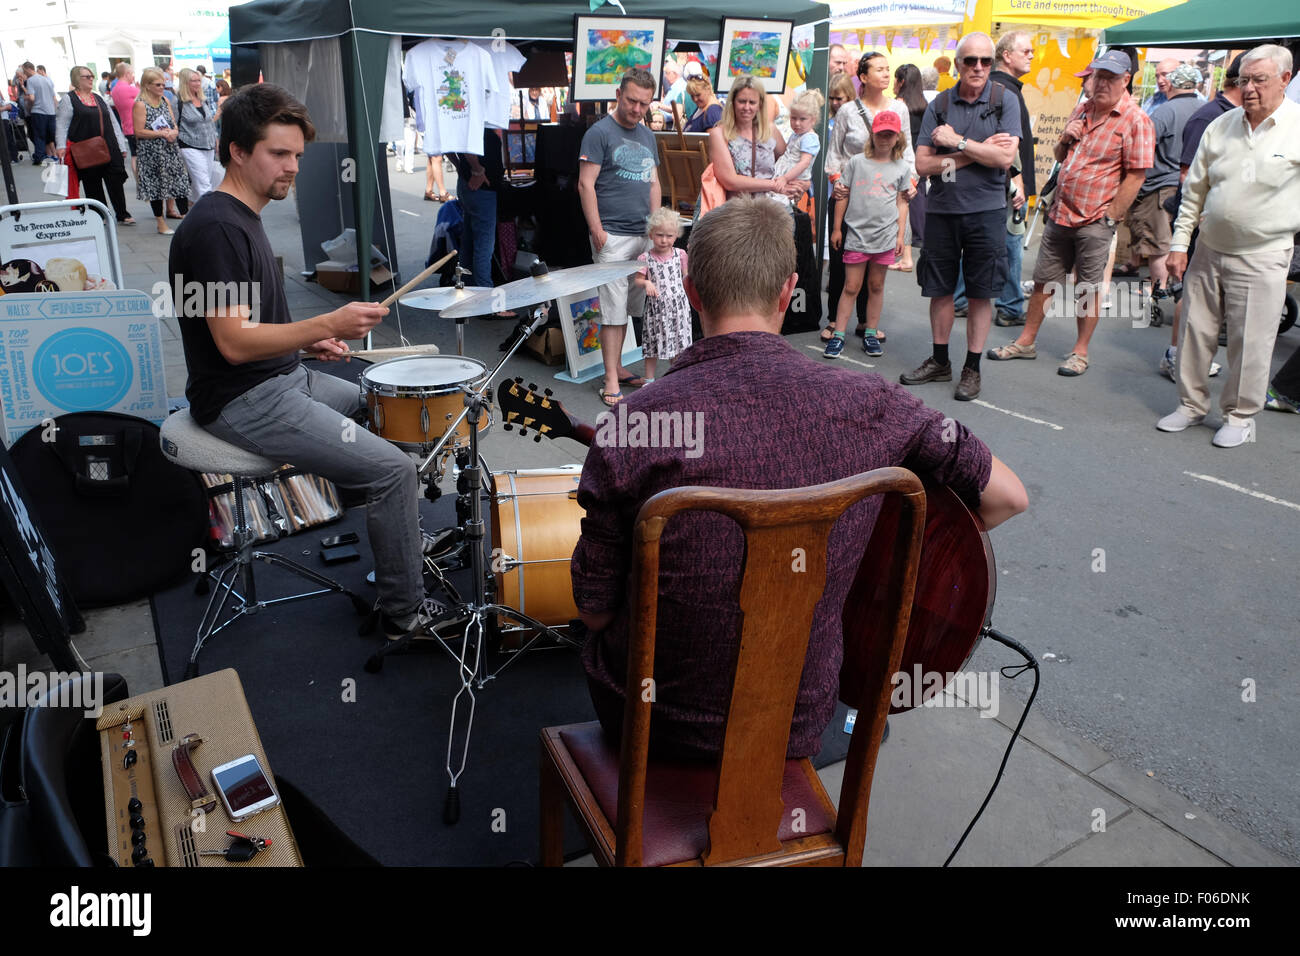 Brecon, Powys, Wales, UK. 8th Aug, 2015. Brecon town centre fills with jazz and music festival fans and impromptu street musicians during the Brecon Jazz and Fringe Festival. Stock Photo